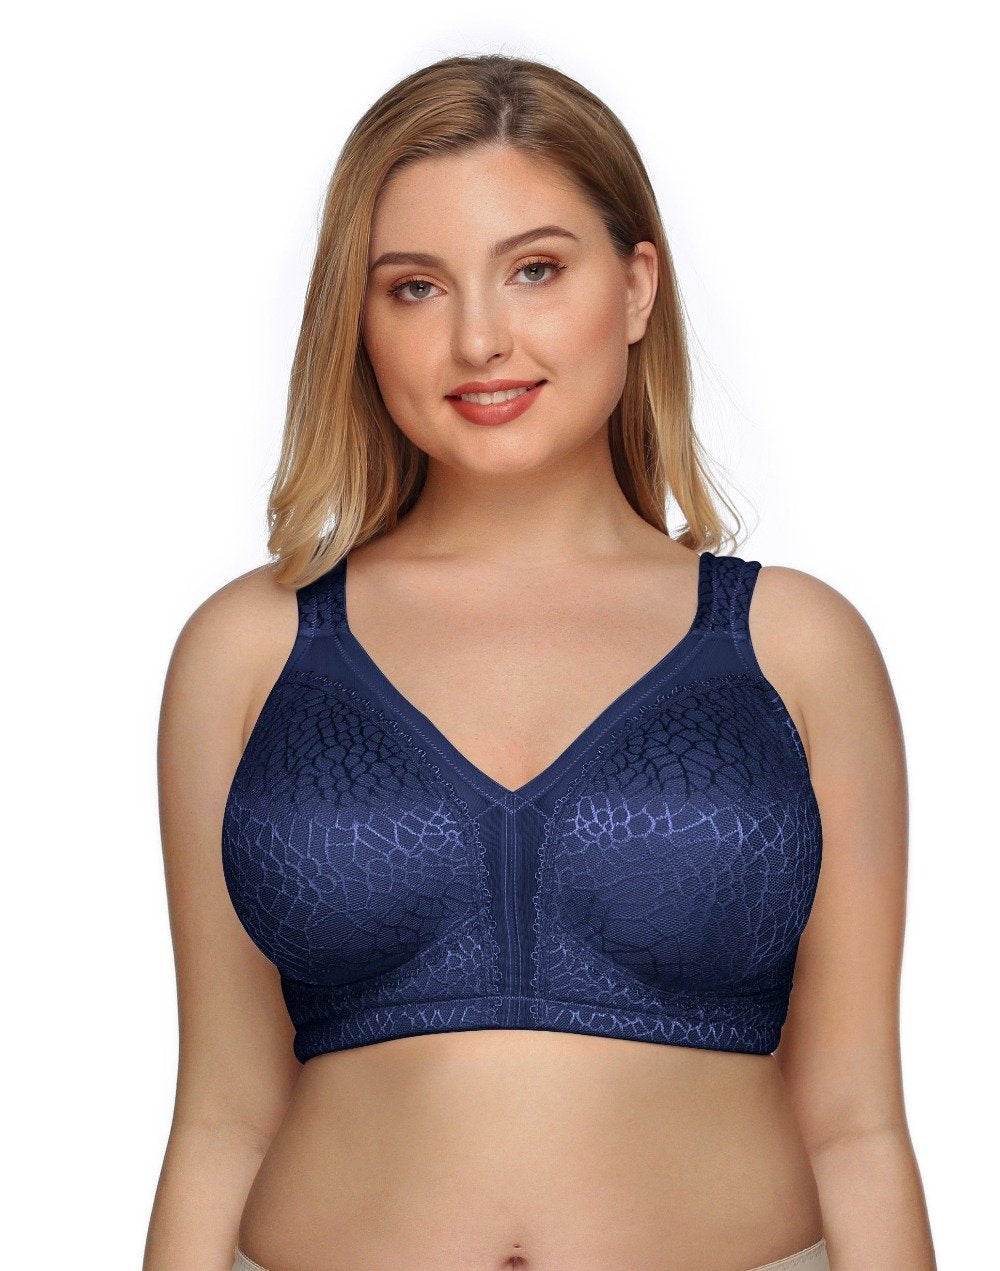 YDKZYMD Wireless Bras with Support and Lift Compression Minimizer